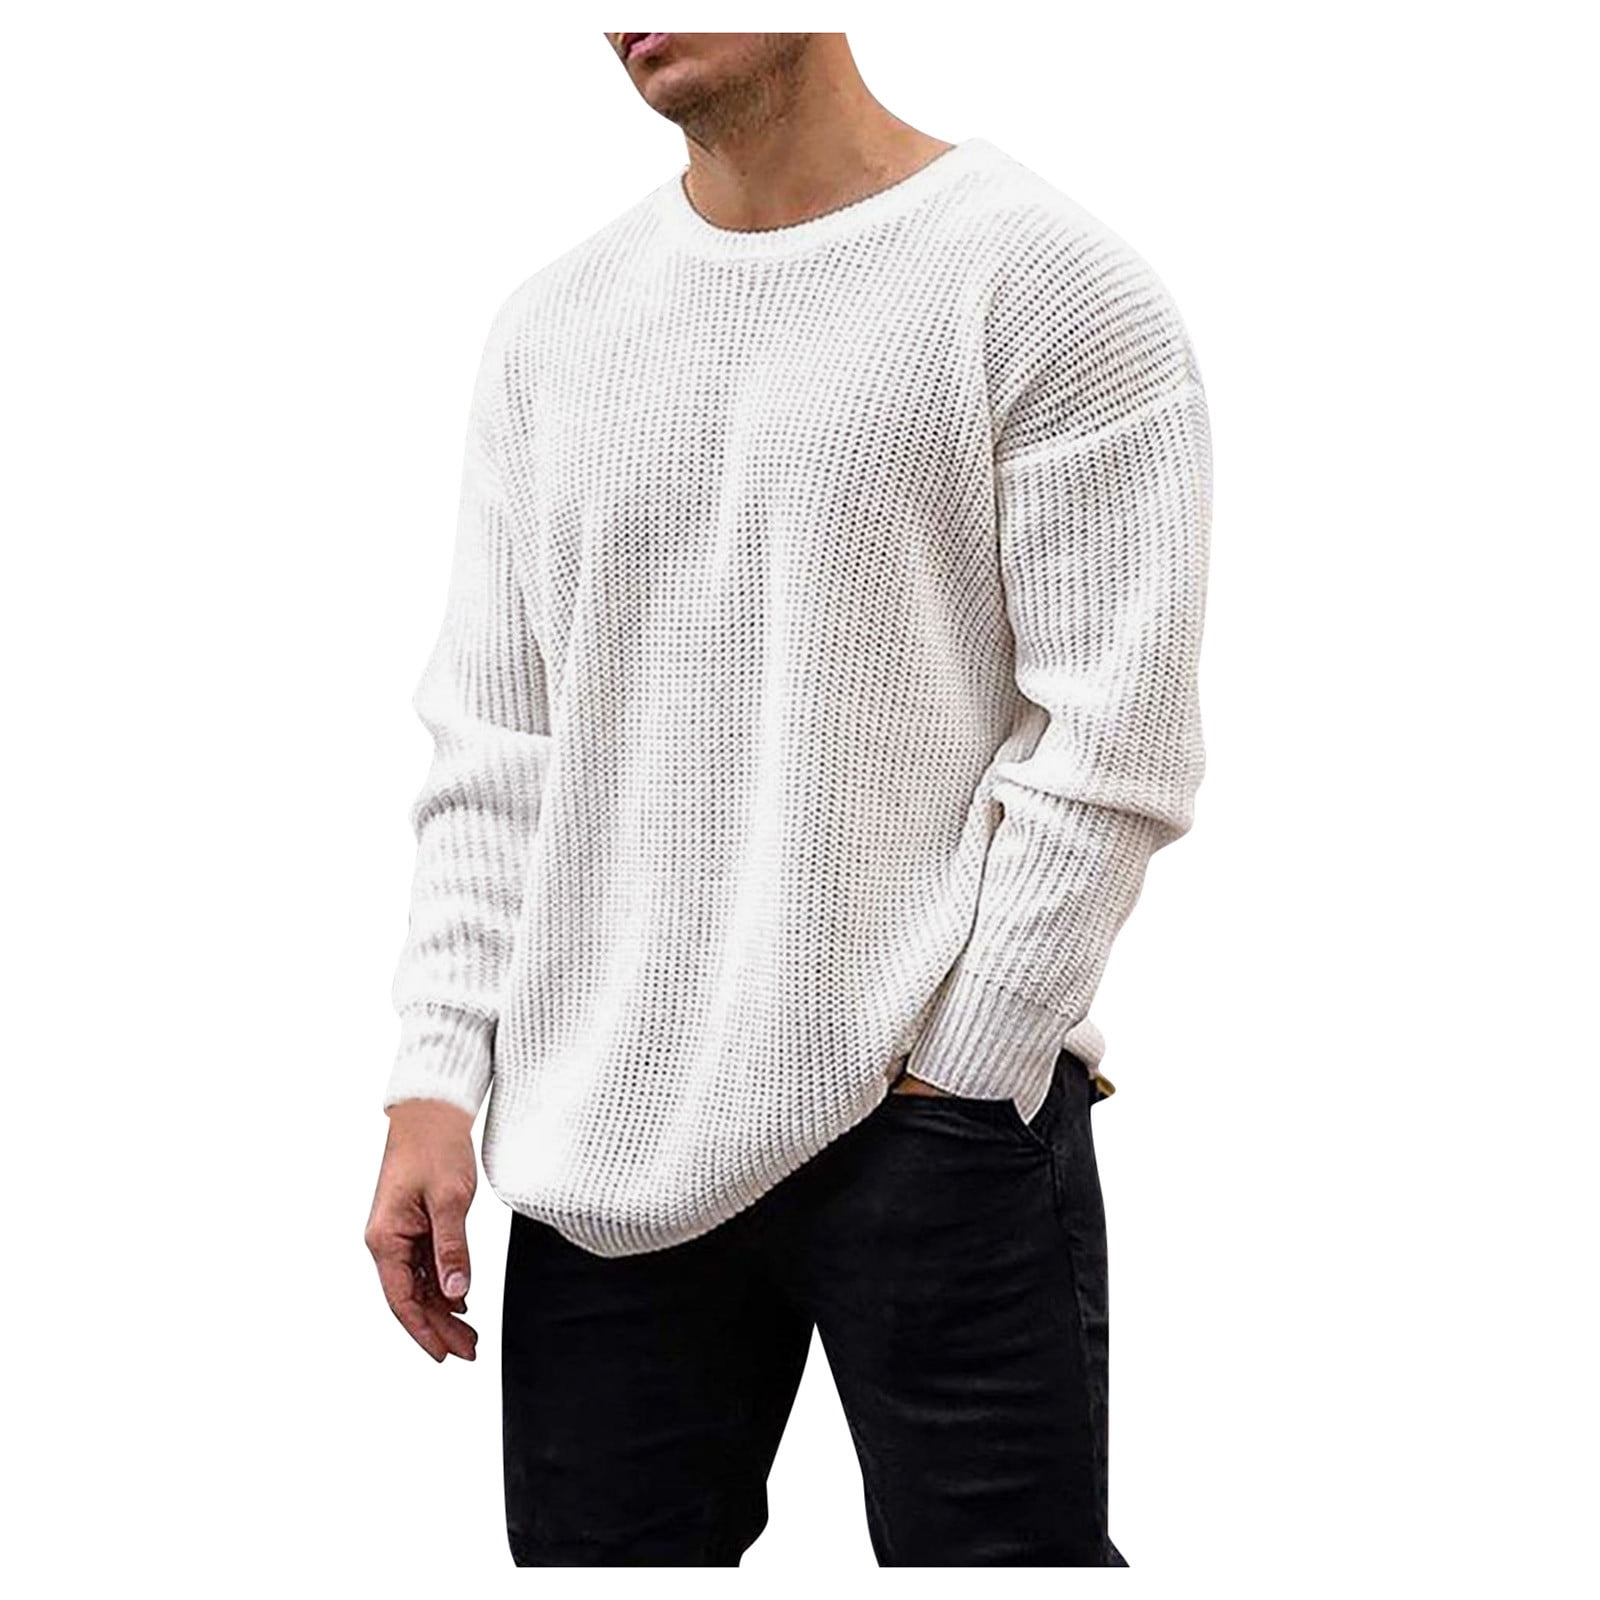 symoid Sweaters for Men- Pullover Crew Neck Loose Solid Casual Long Sleeve  Knit Sweatshirts Tops ,for Autumn/Spring/Winter White S